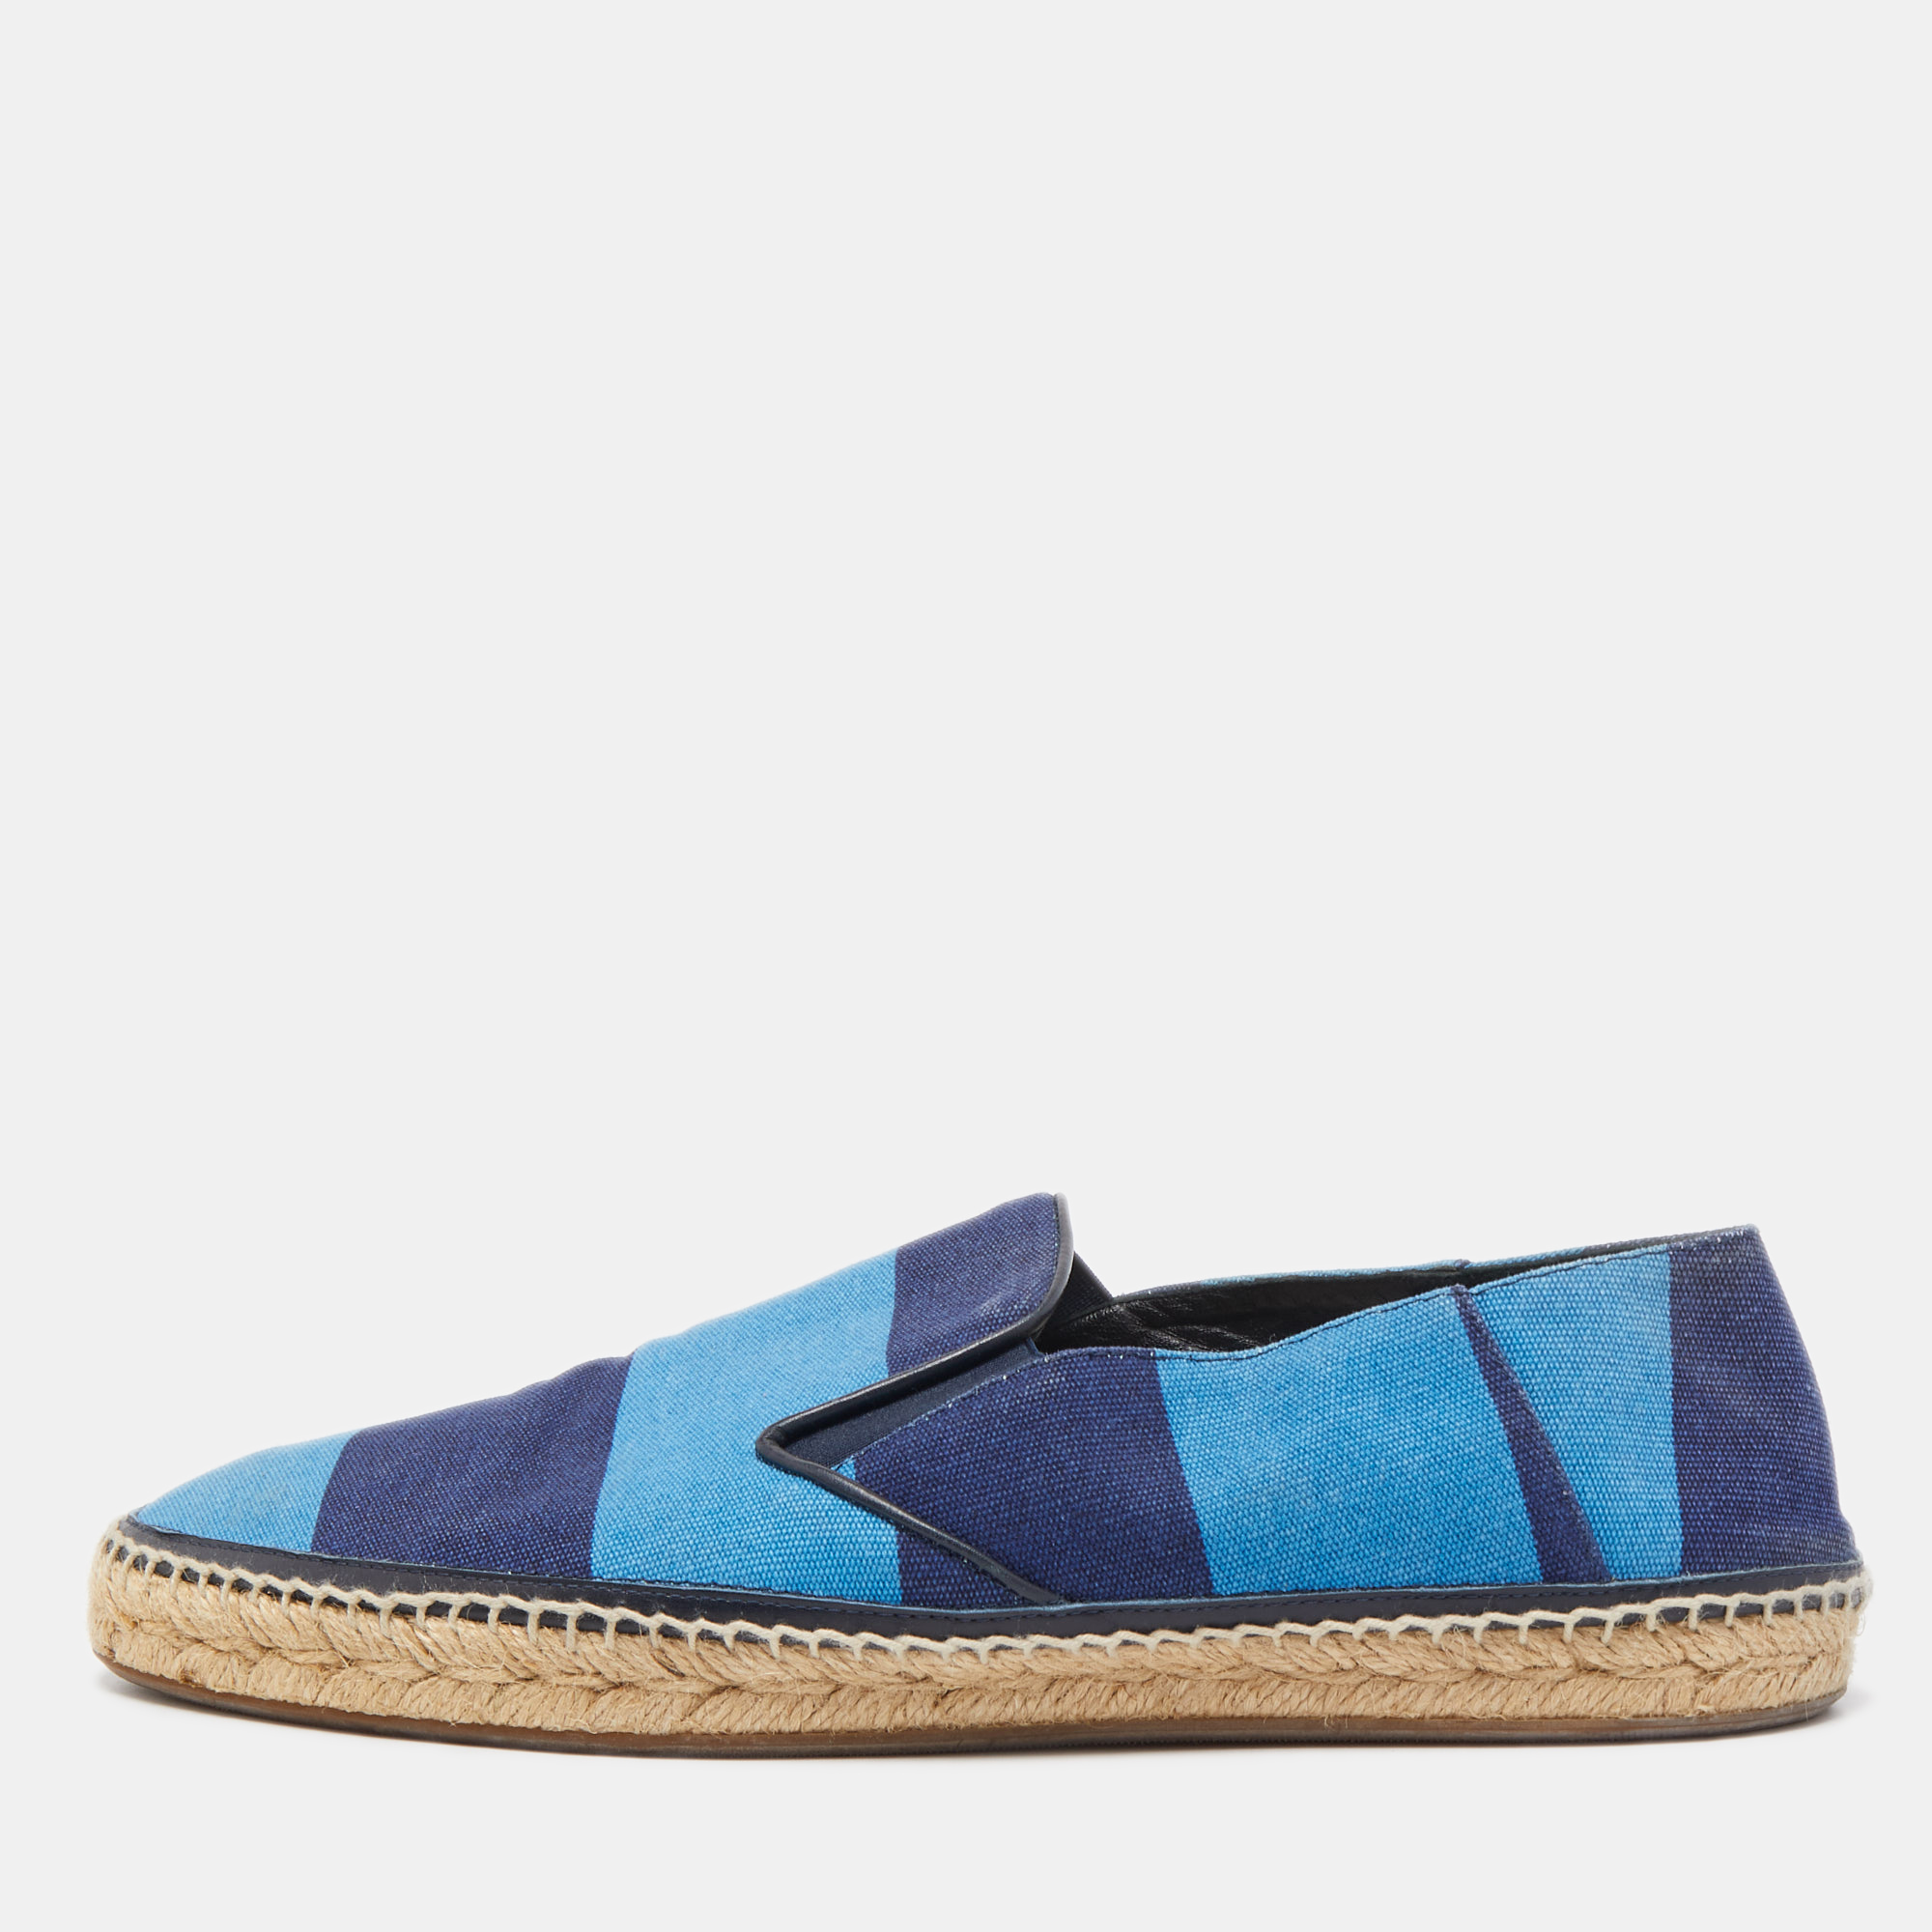 Pre-owned Burberry Blue Canvas Slip On Espadrille Flats Size 42.5